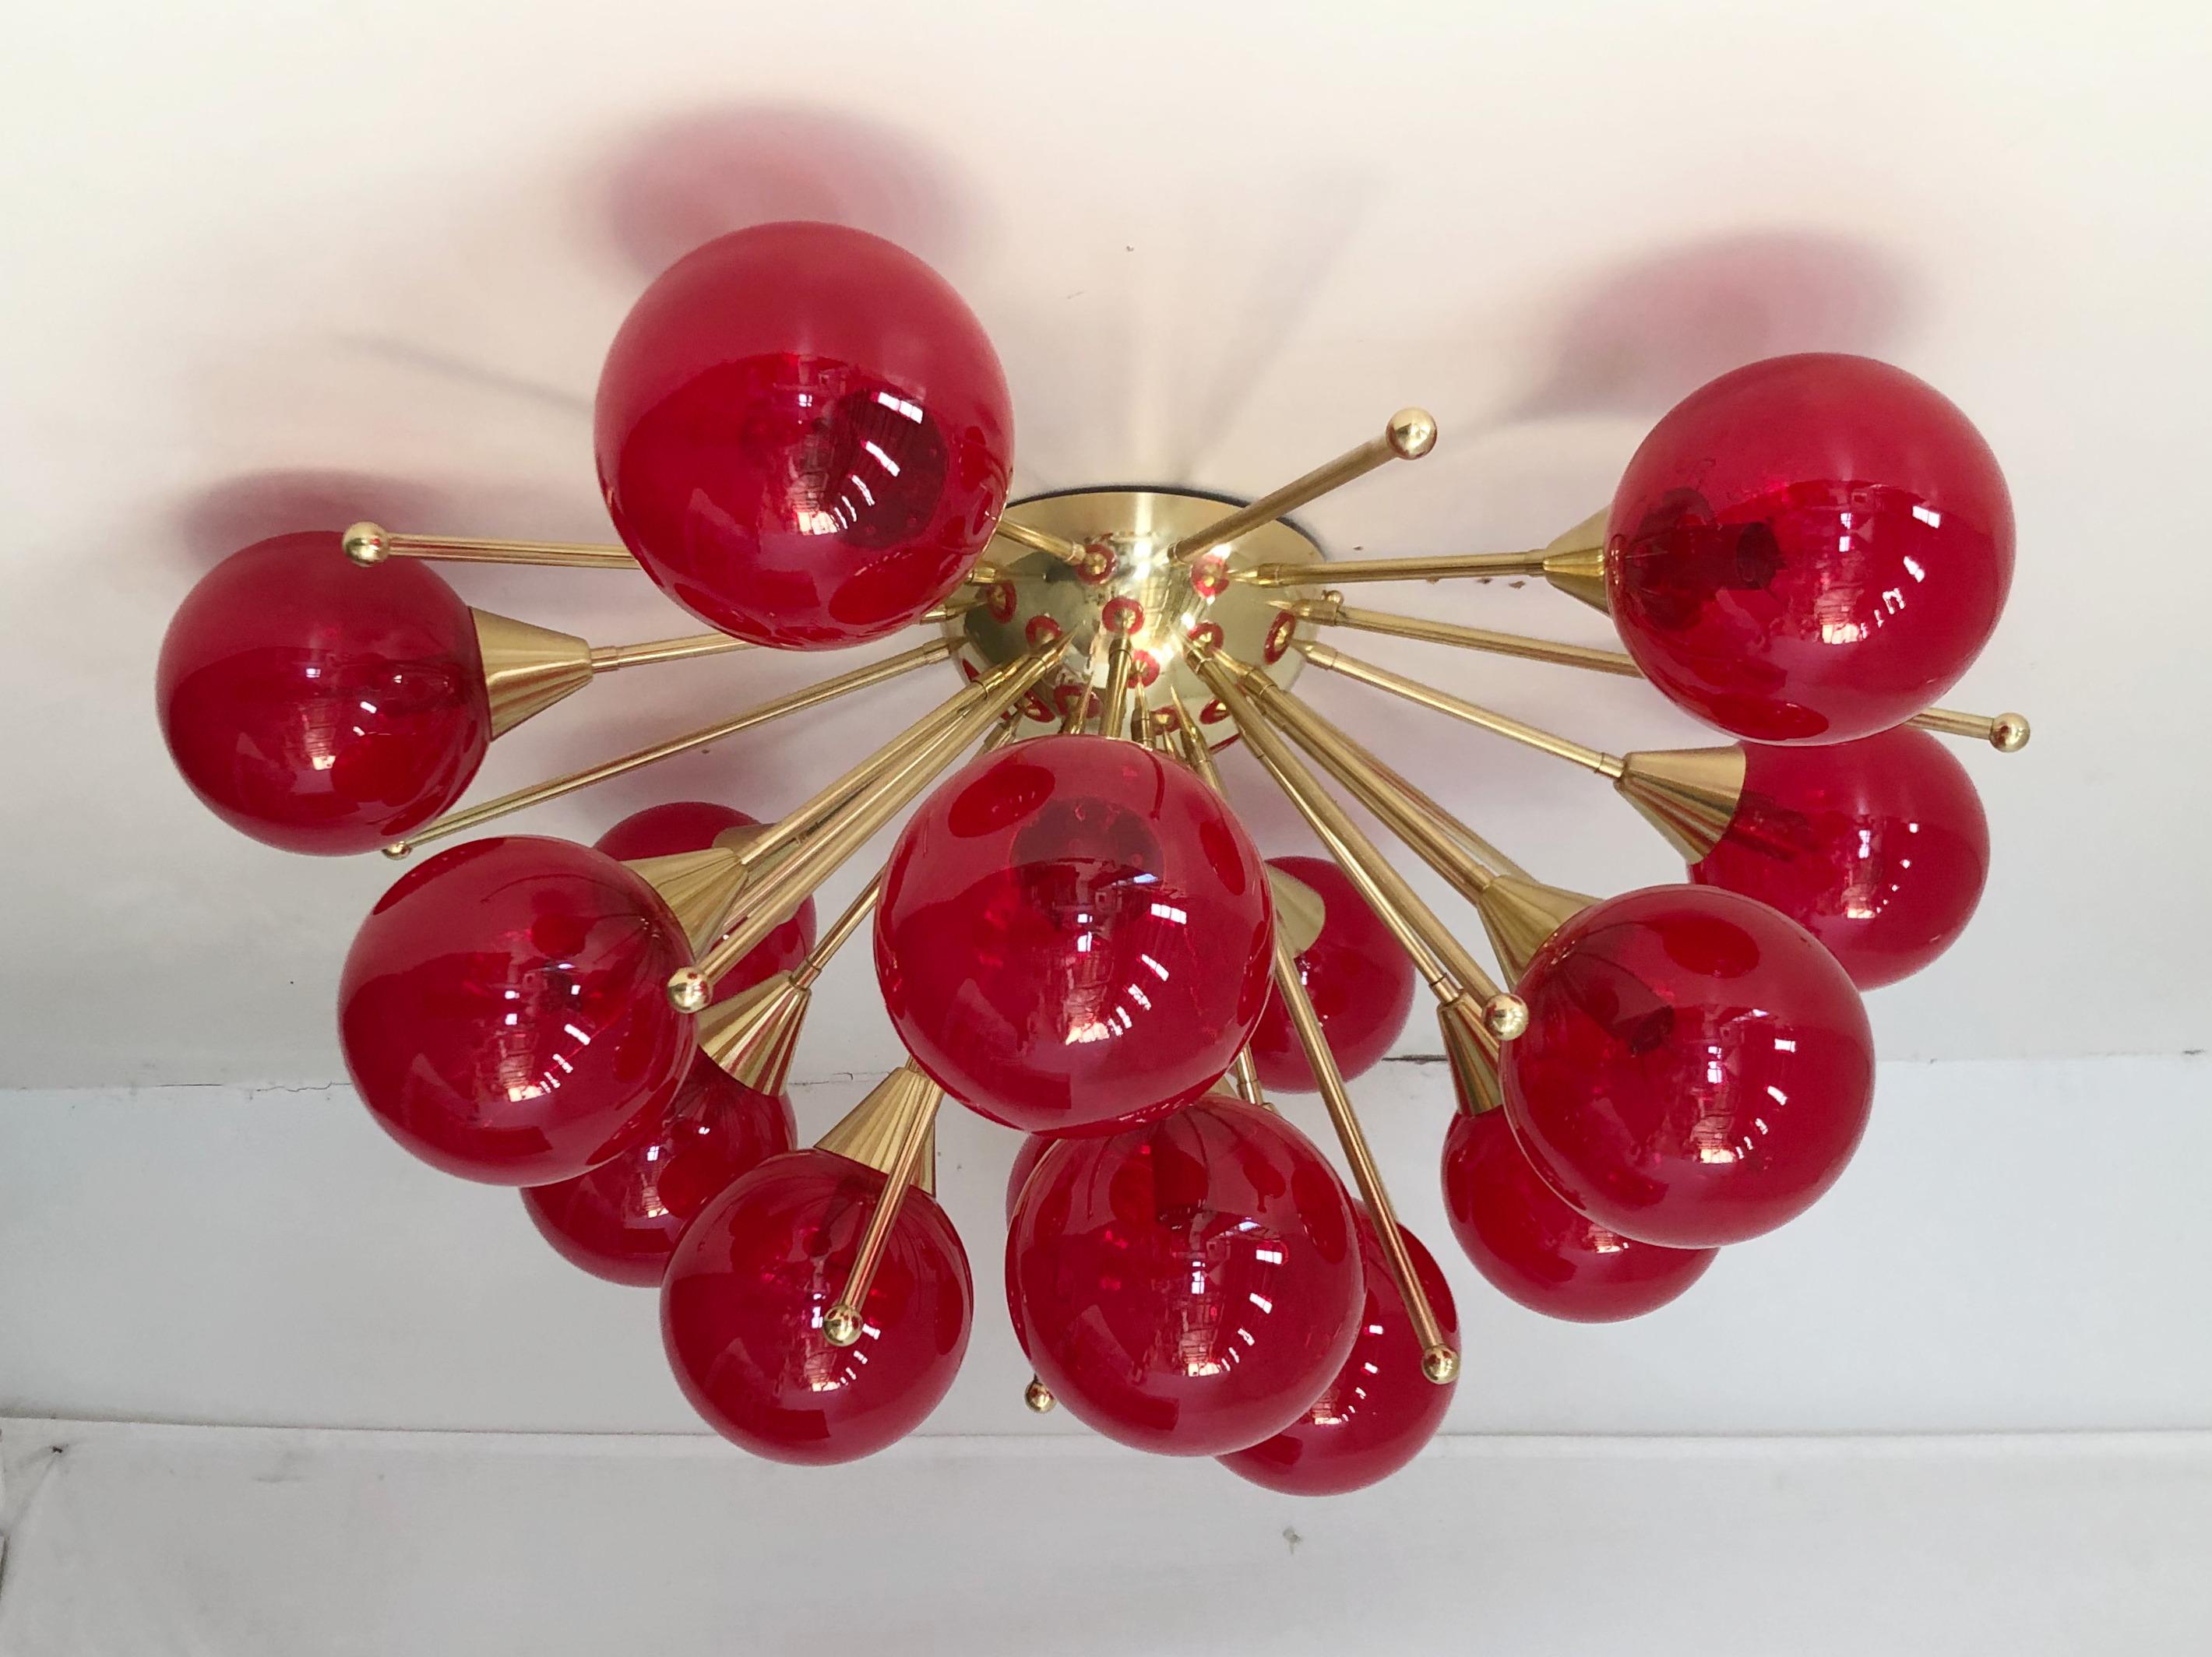 Italian Sputnik flush mount with Murano glass globes mounted on solid brass frame / Designed by Fabio Bergomi for Fabio Ltd / Made in Italy
15 lights / E12 or E14 type / max 40W each
Measures: Diameter 35.5 inches, height 18 inches
Order only / this